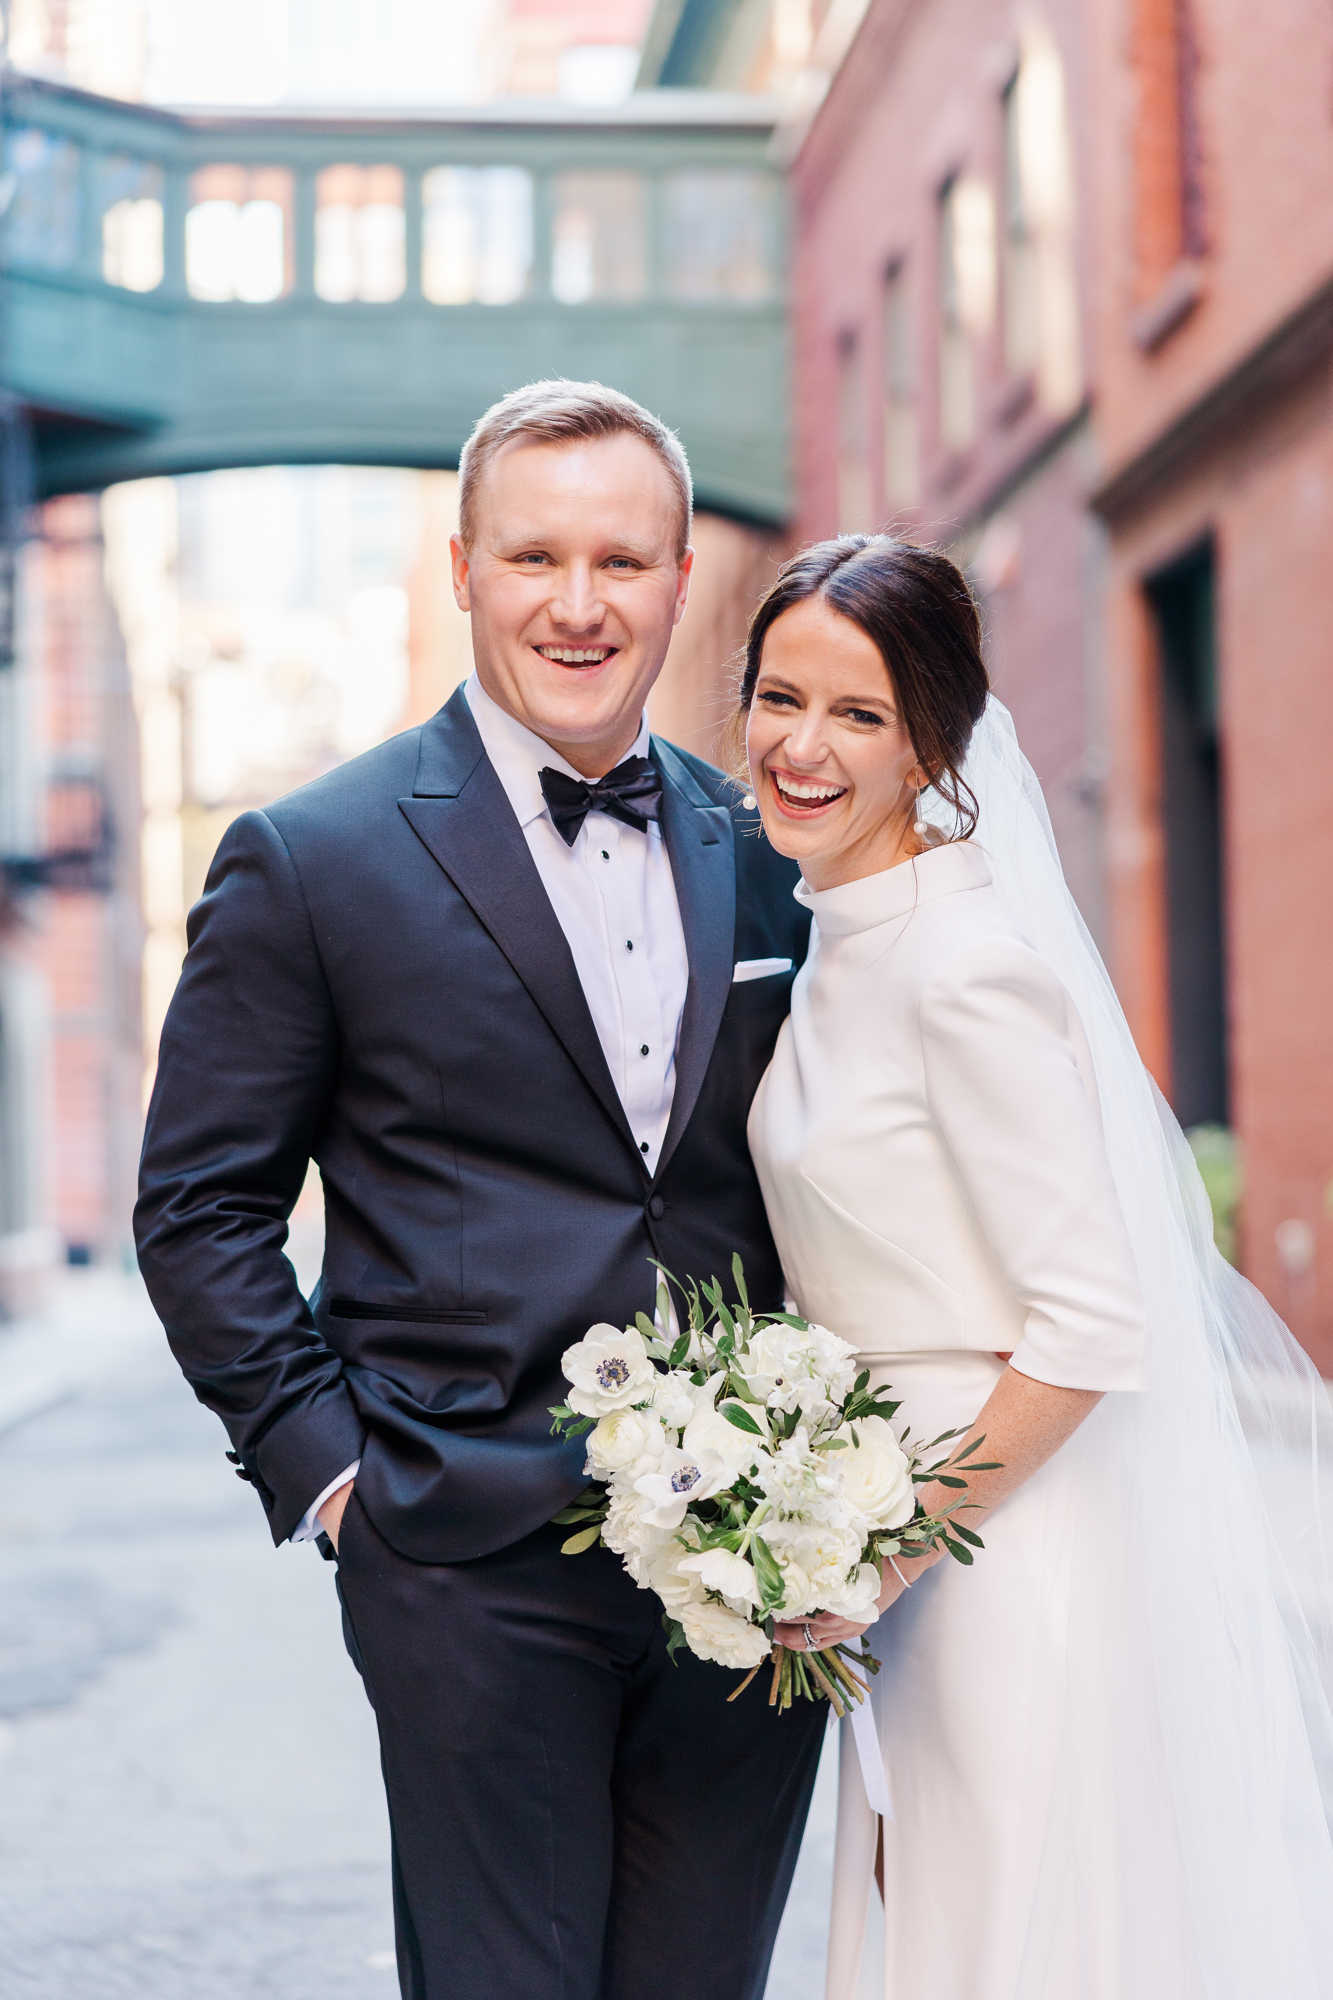 Look For These Things When Hiring a Wedding Photographer In New York